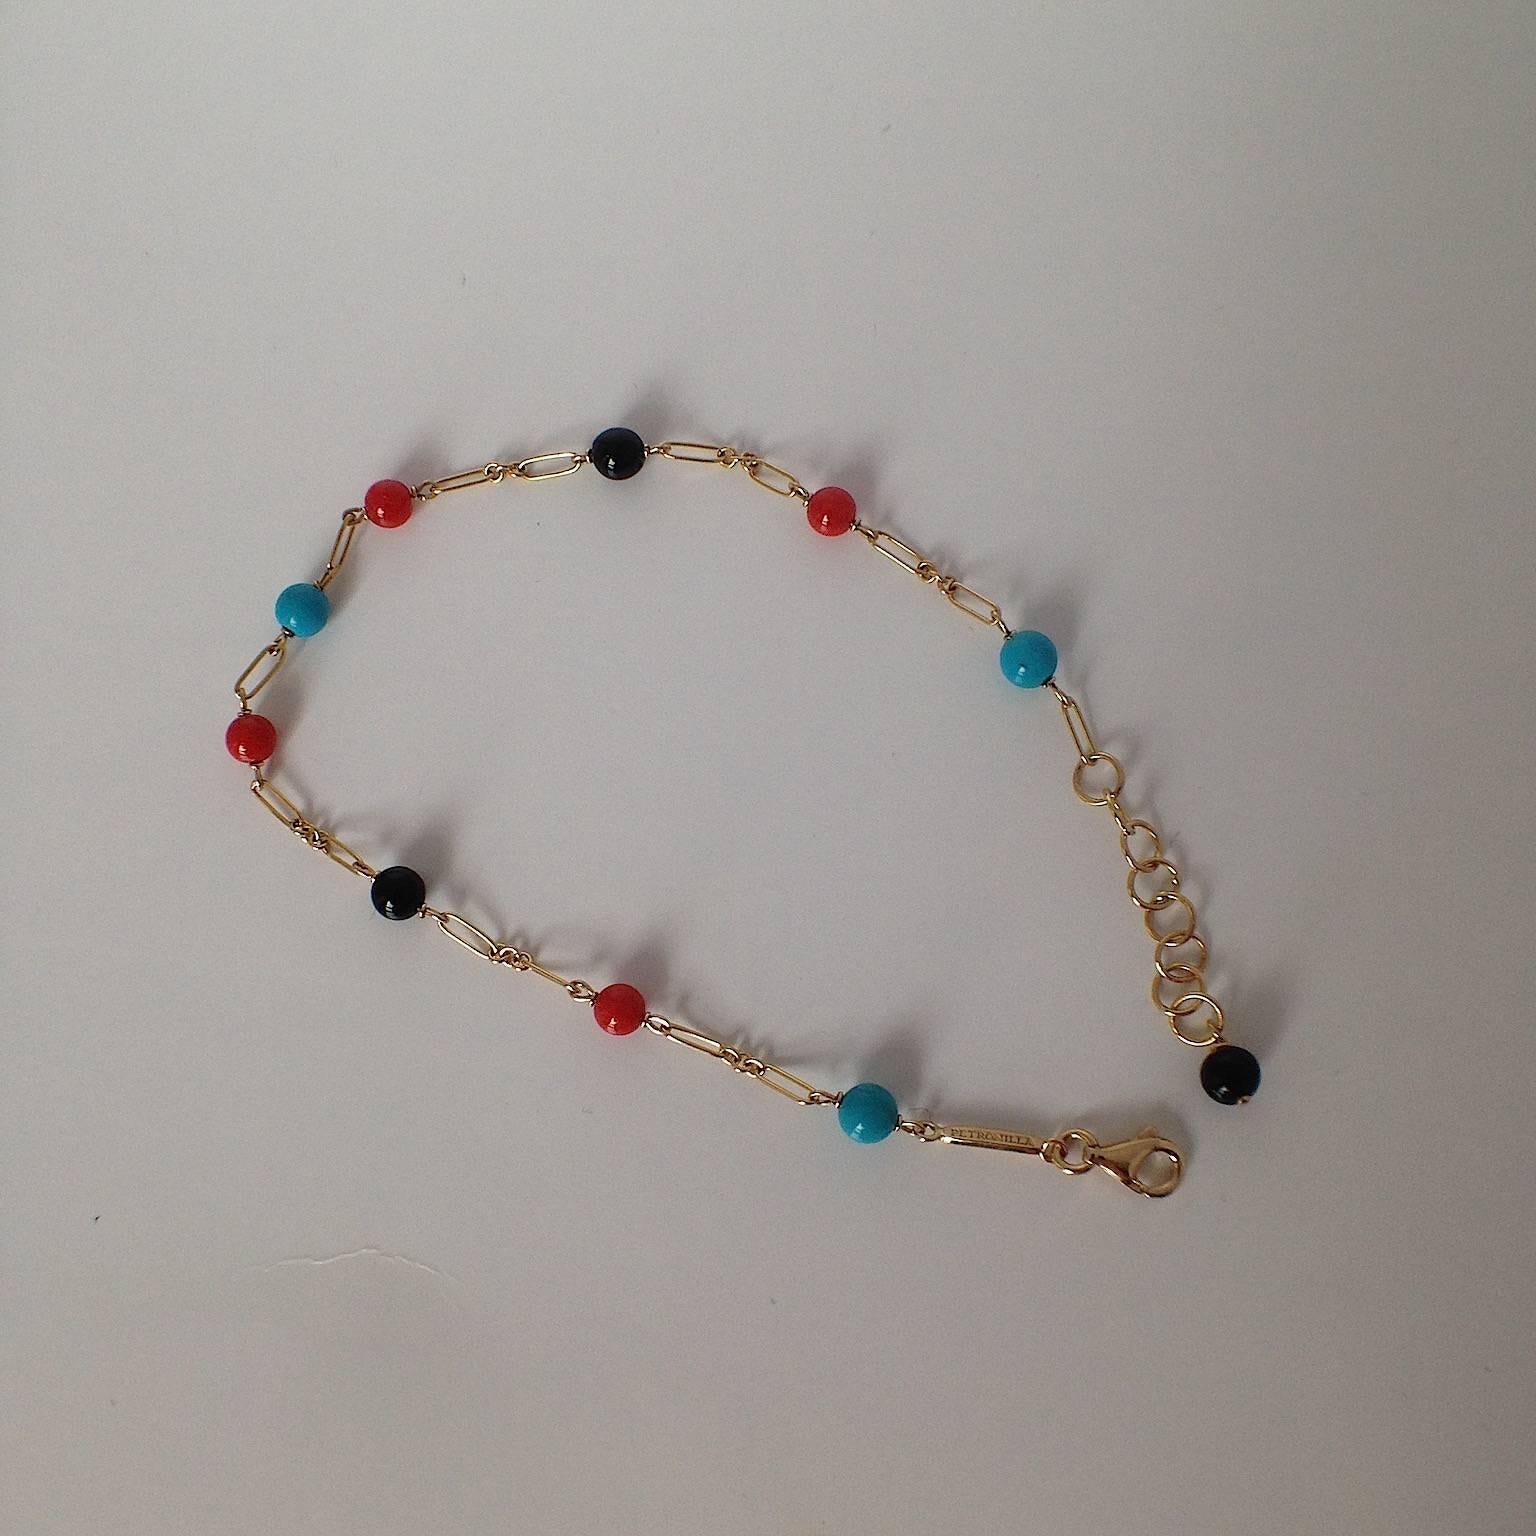 Women's Red and Black Coral Turquoise Bead Handmade Gold Bracelet